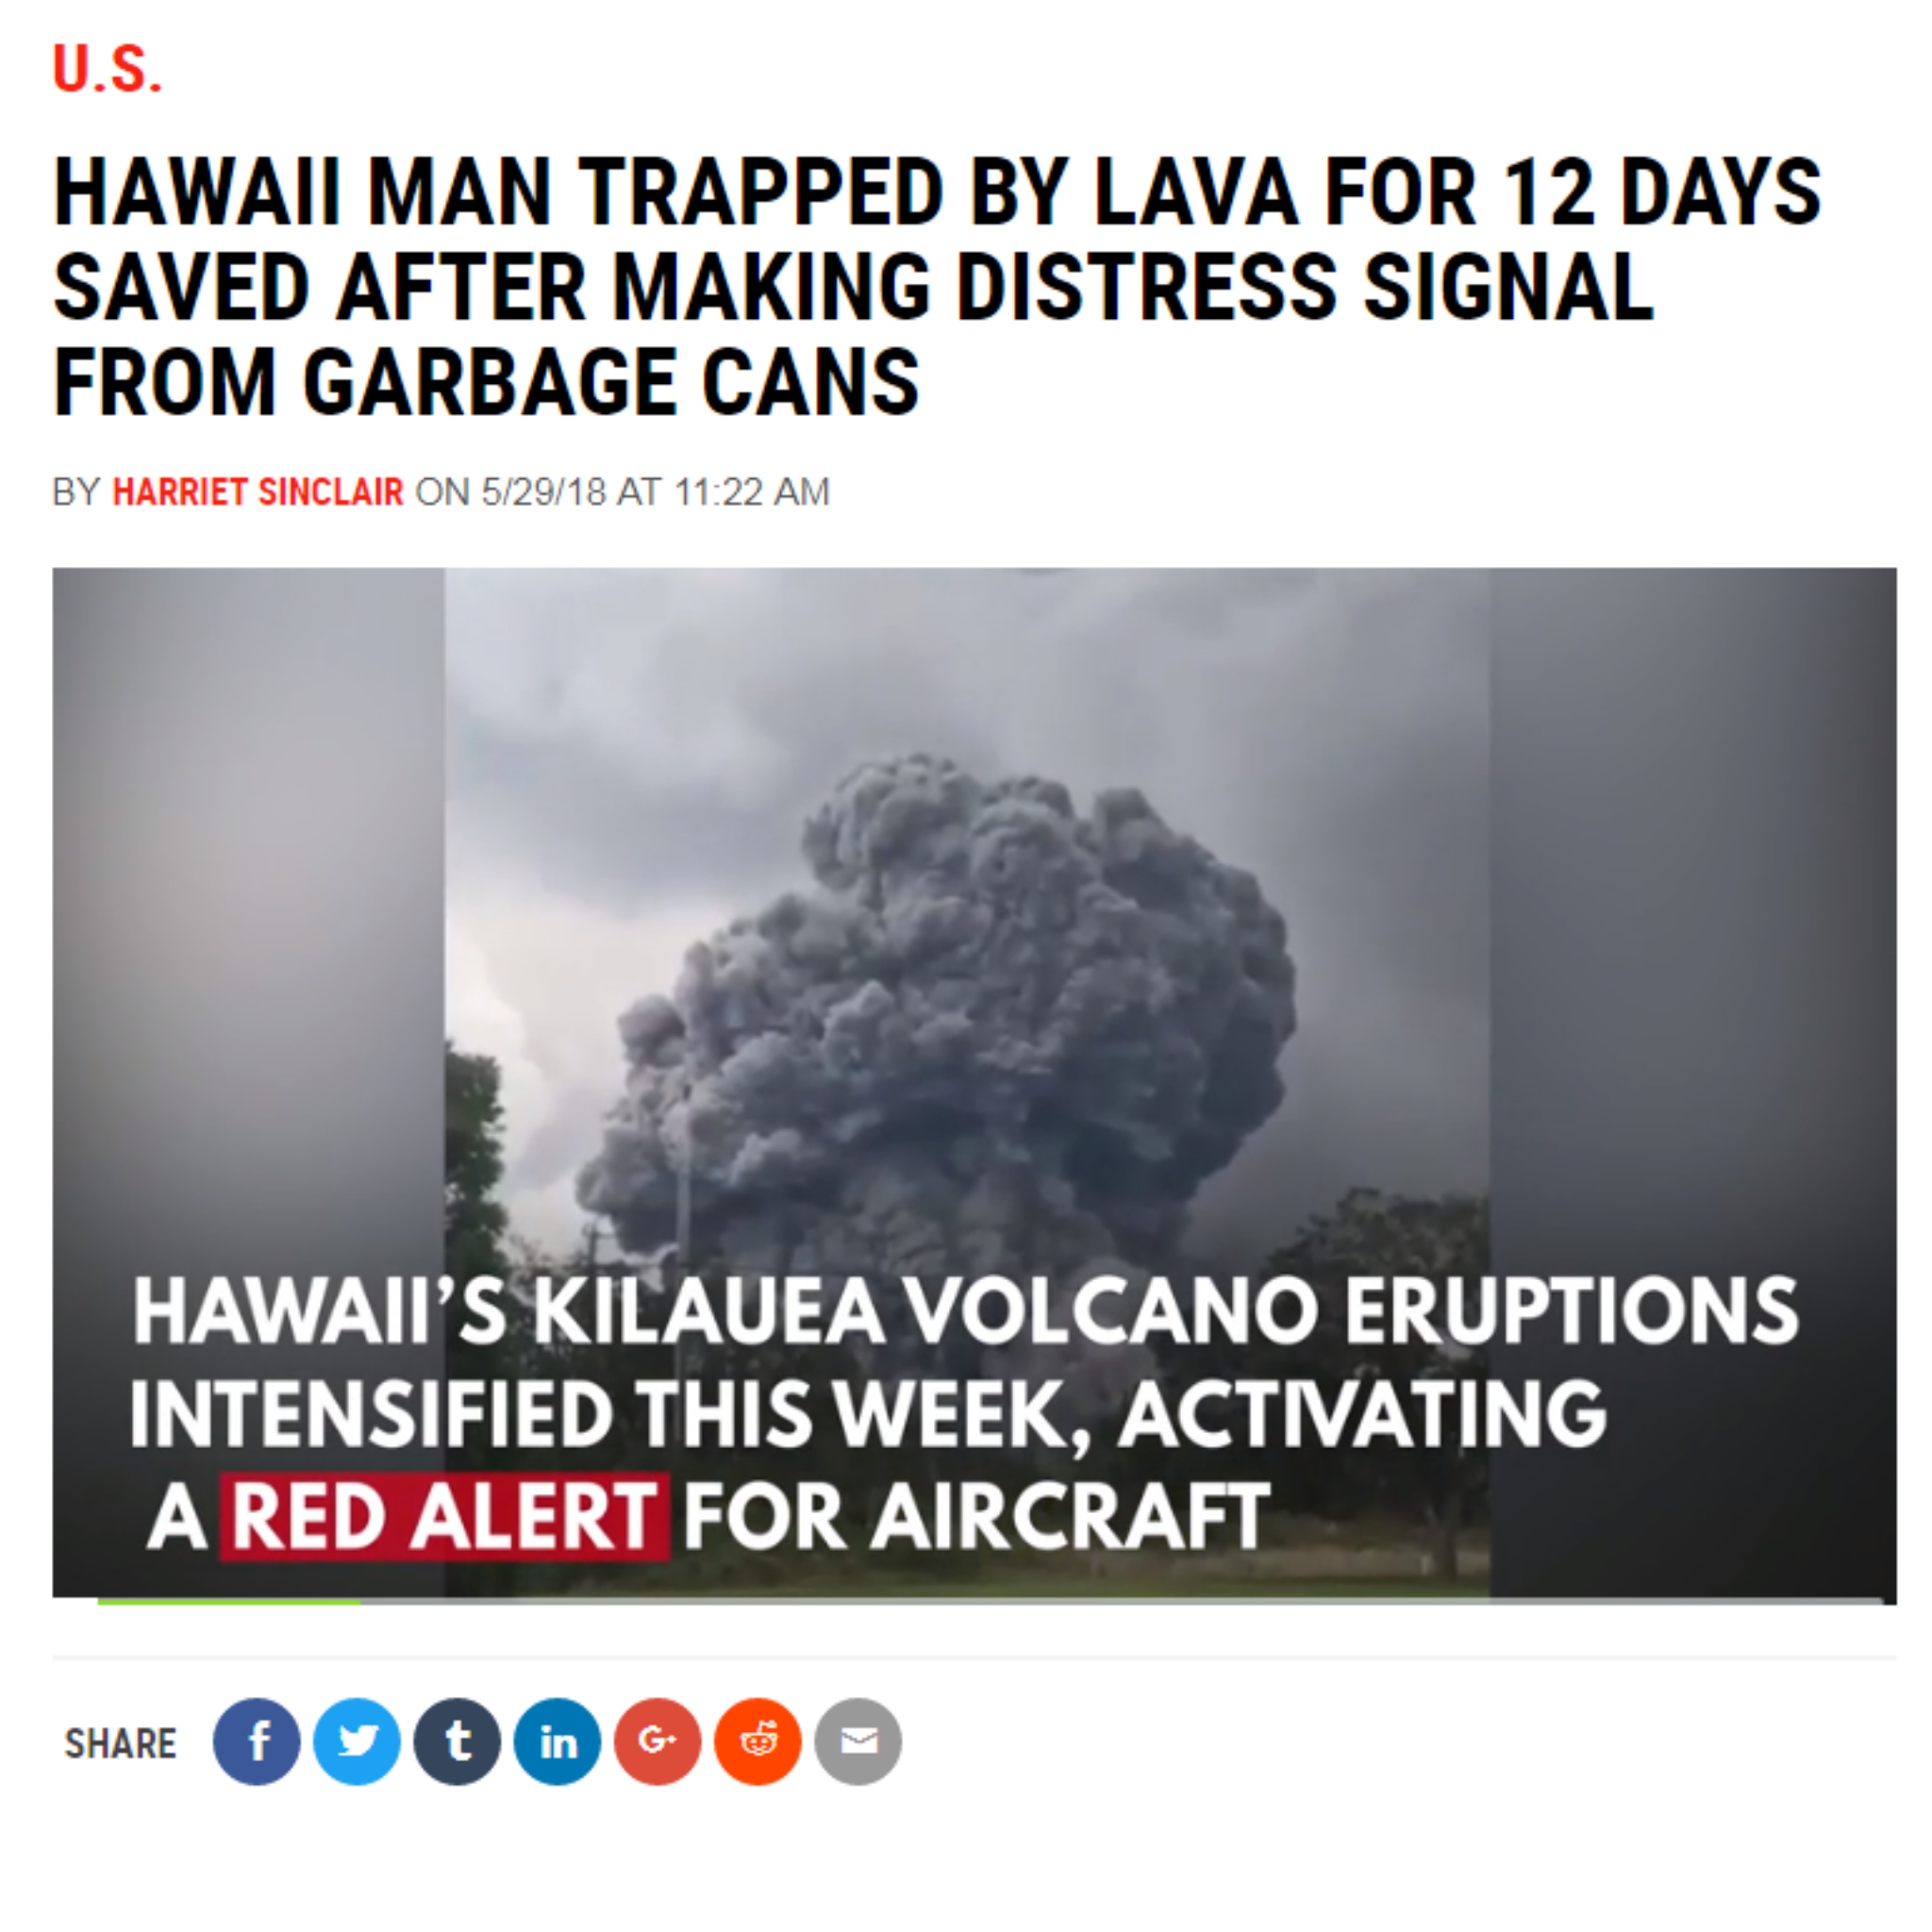 presentation - U.S. Hawaii Man Trapped By Lava For 12 Days Saved After Making Distress Signal From Garbage Cans By Harriet Sinclair On 52918 At Hawail'S Kilauea Volcano Eruptions Intensified This Week, Activating A Red Alert For Aircraft OOO000